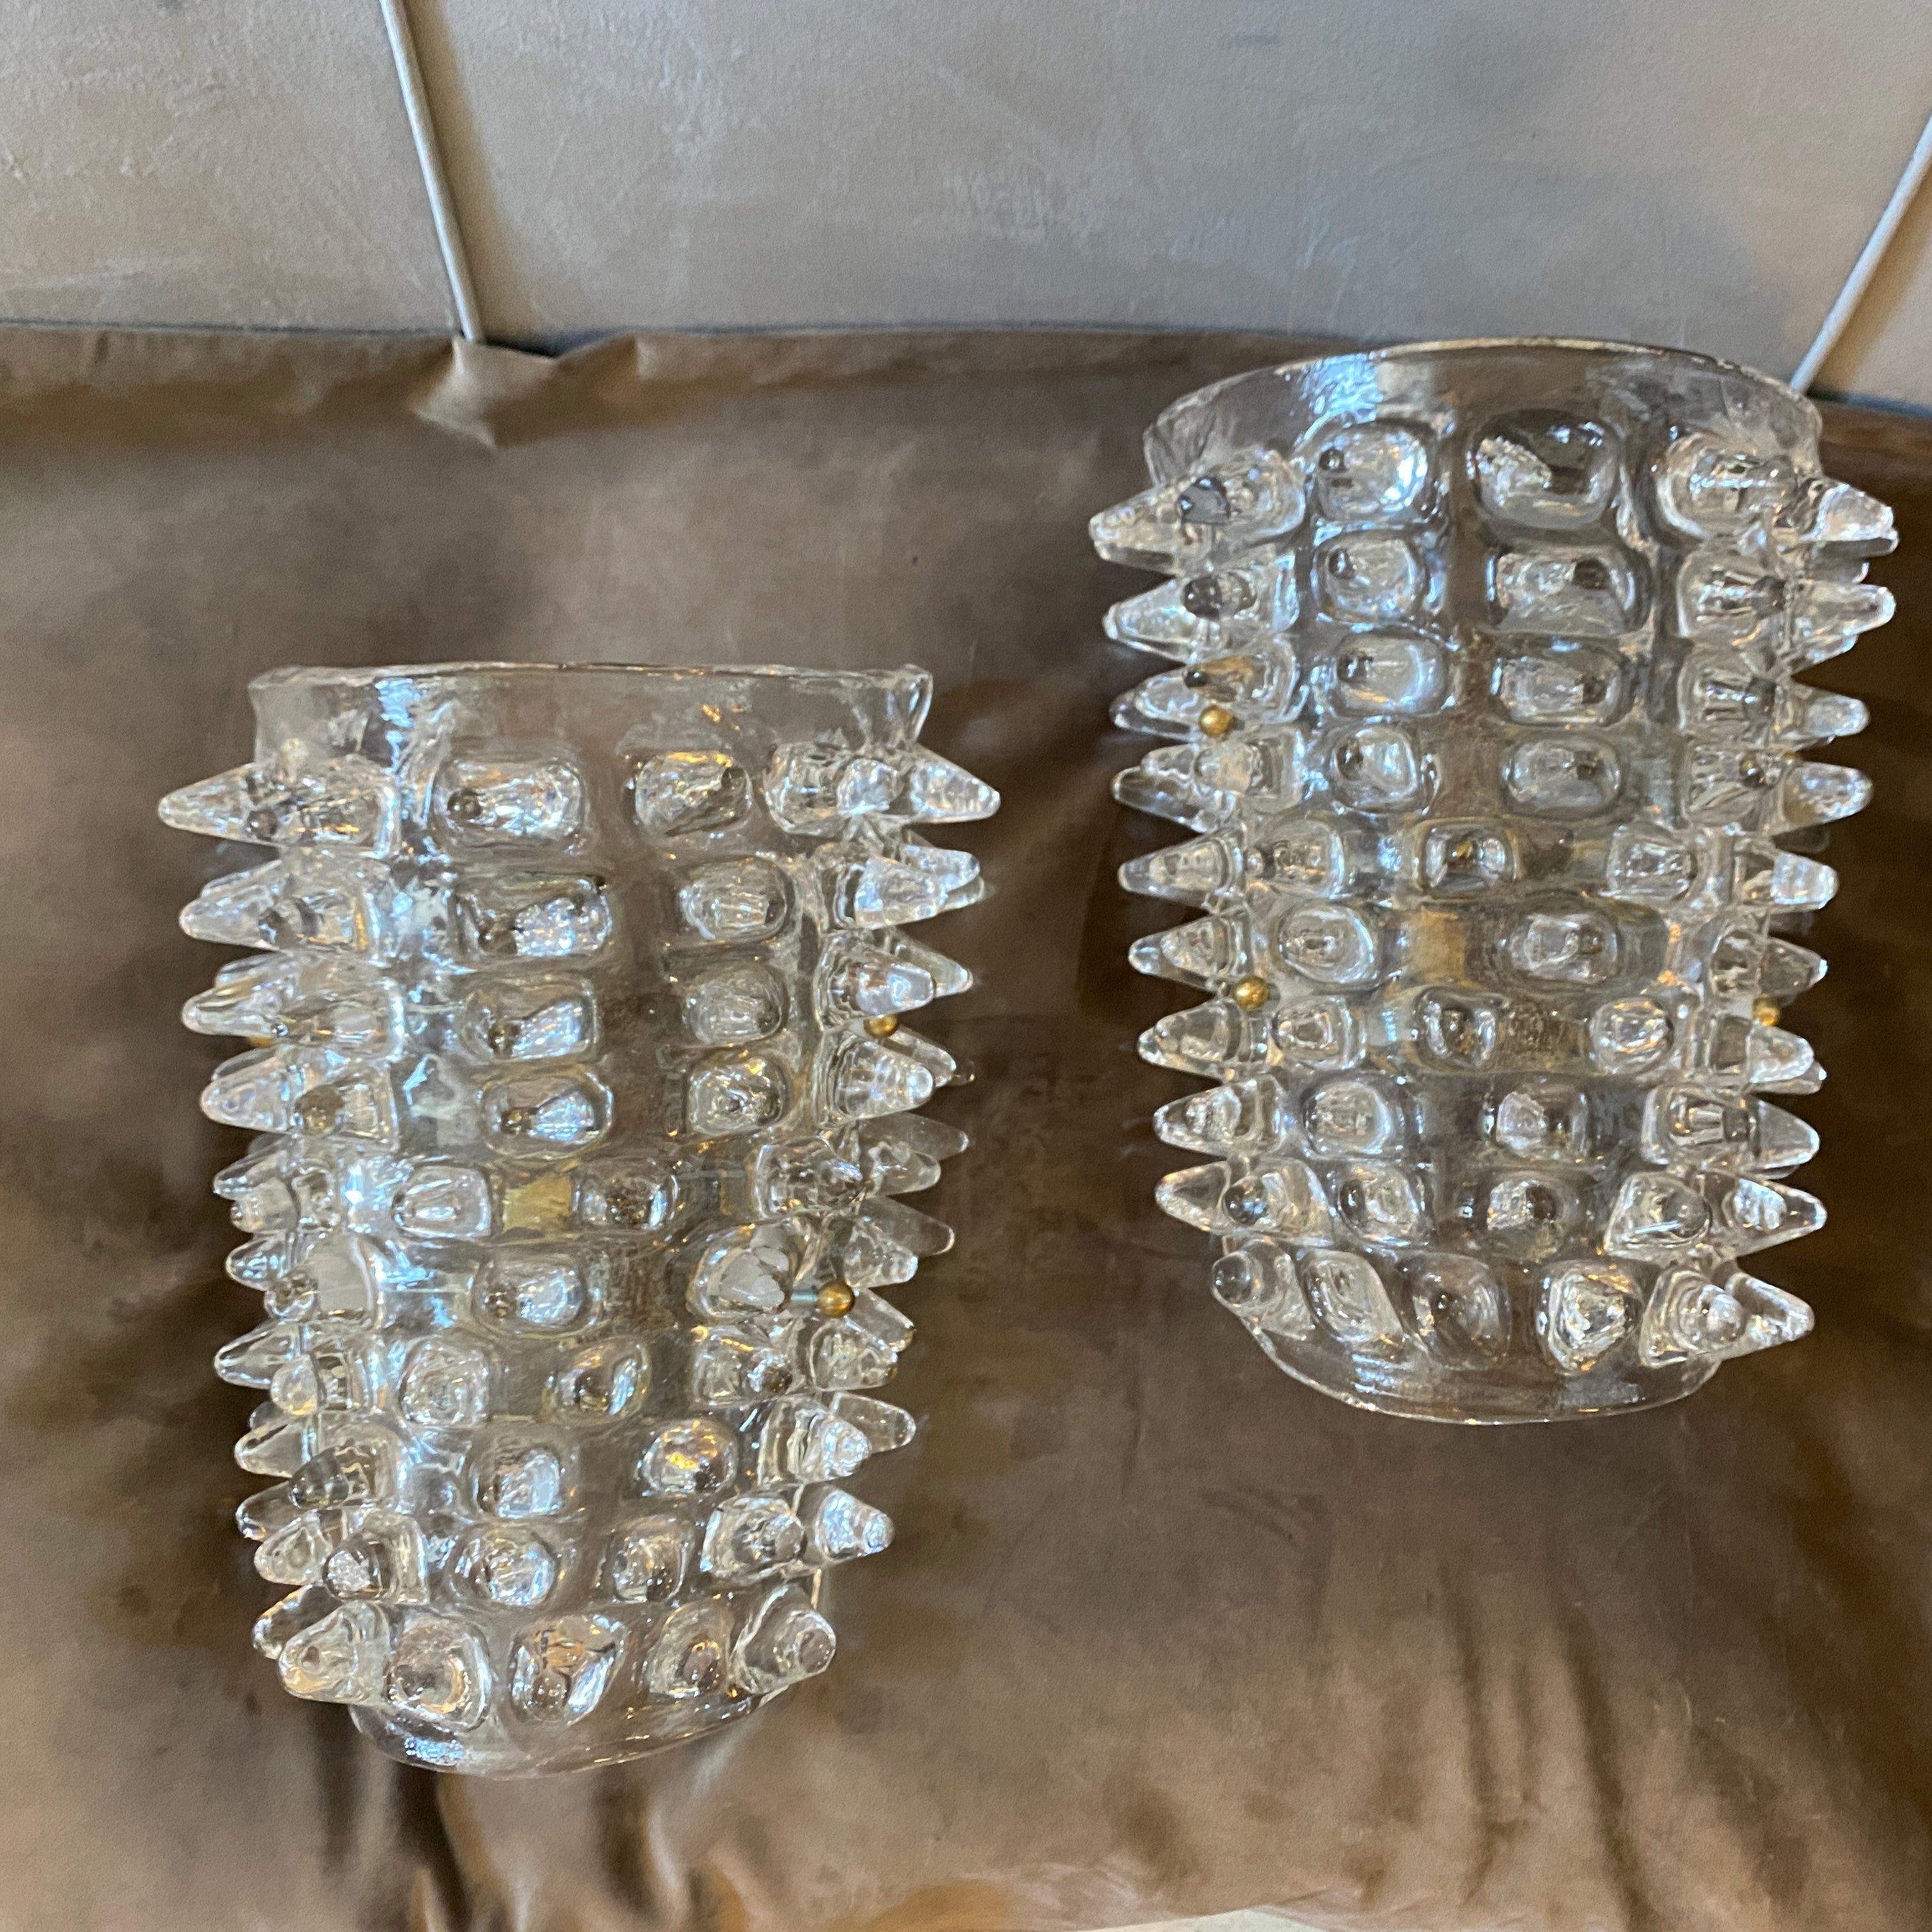 A pair of Mid-Century Modern rostrato transparent murano glass wall sconces hand-crafted in Italy in the style of famous manufacturer Barovier that invented this particular glass processing characterized by large light-reflecting points, obtained